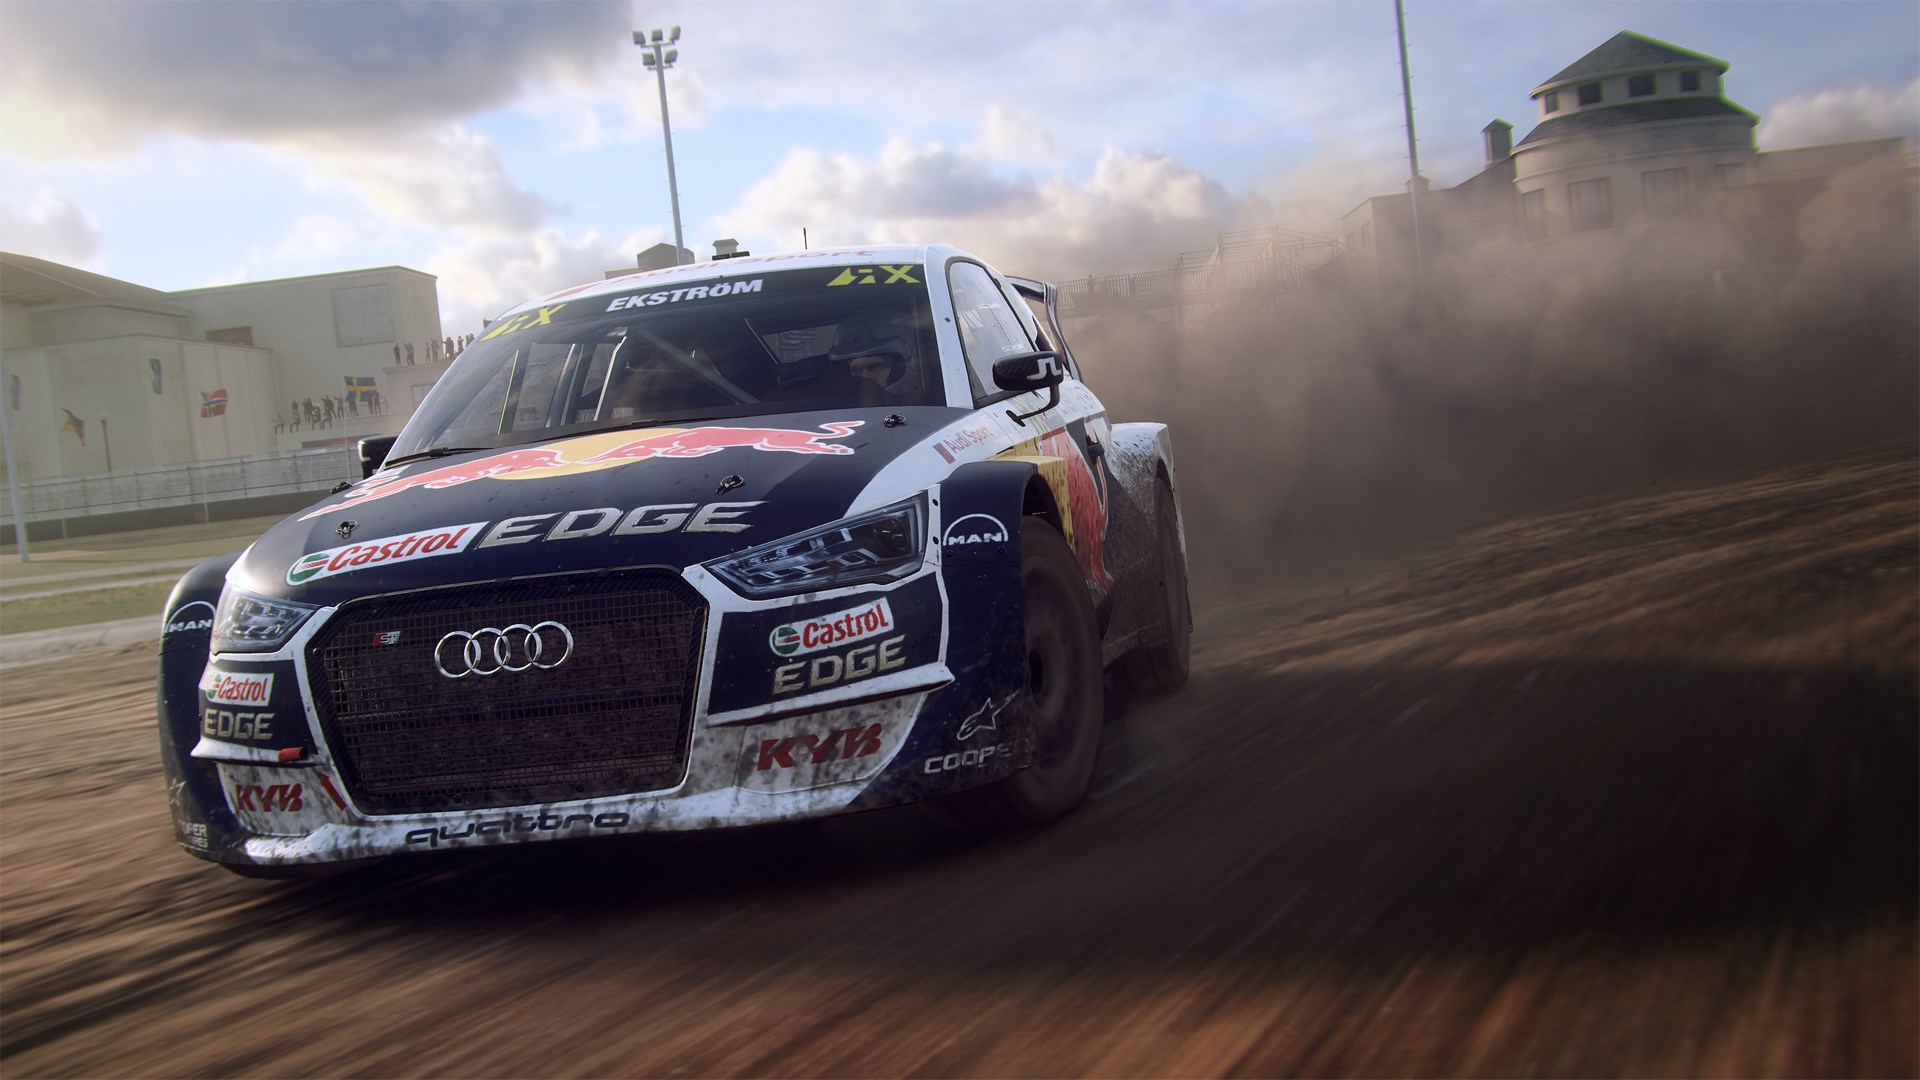 Dirt Rally 2.0 Free Trial Available Now on PS4 & Xbox One